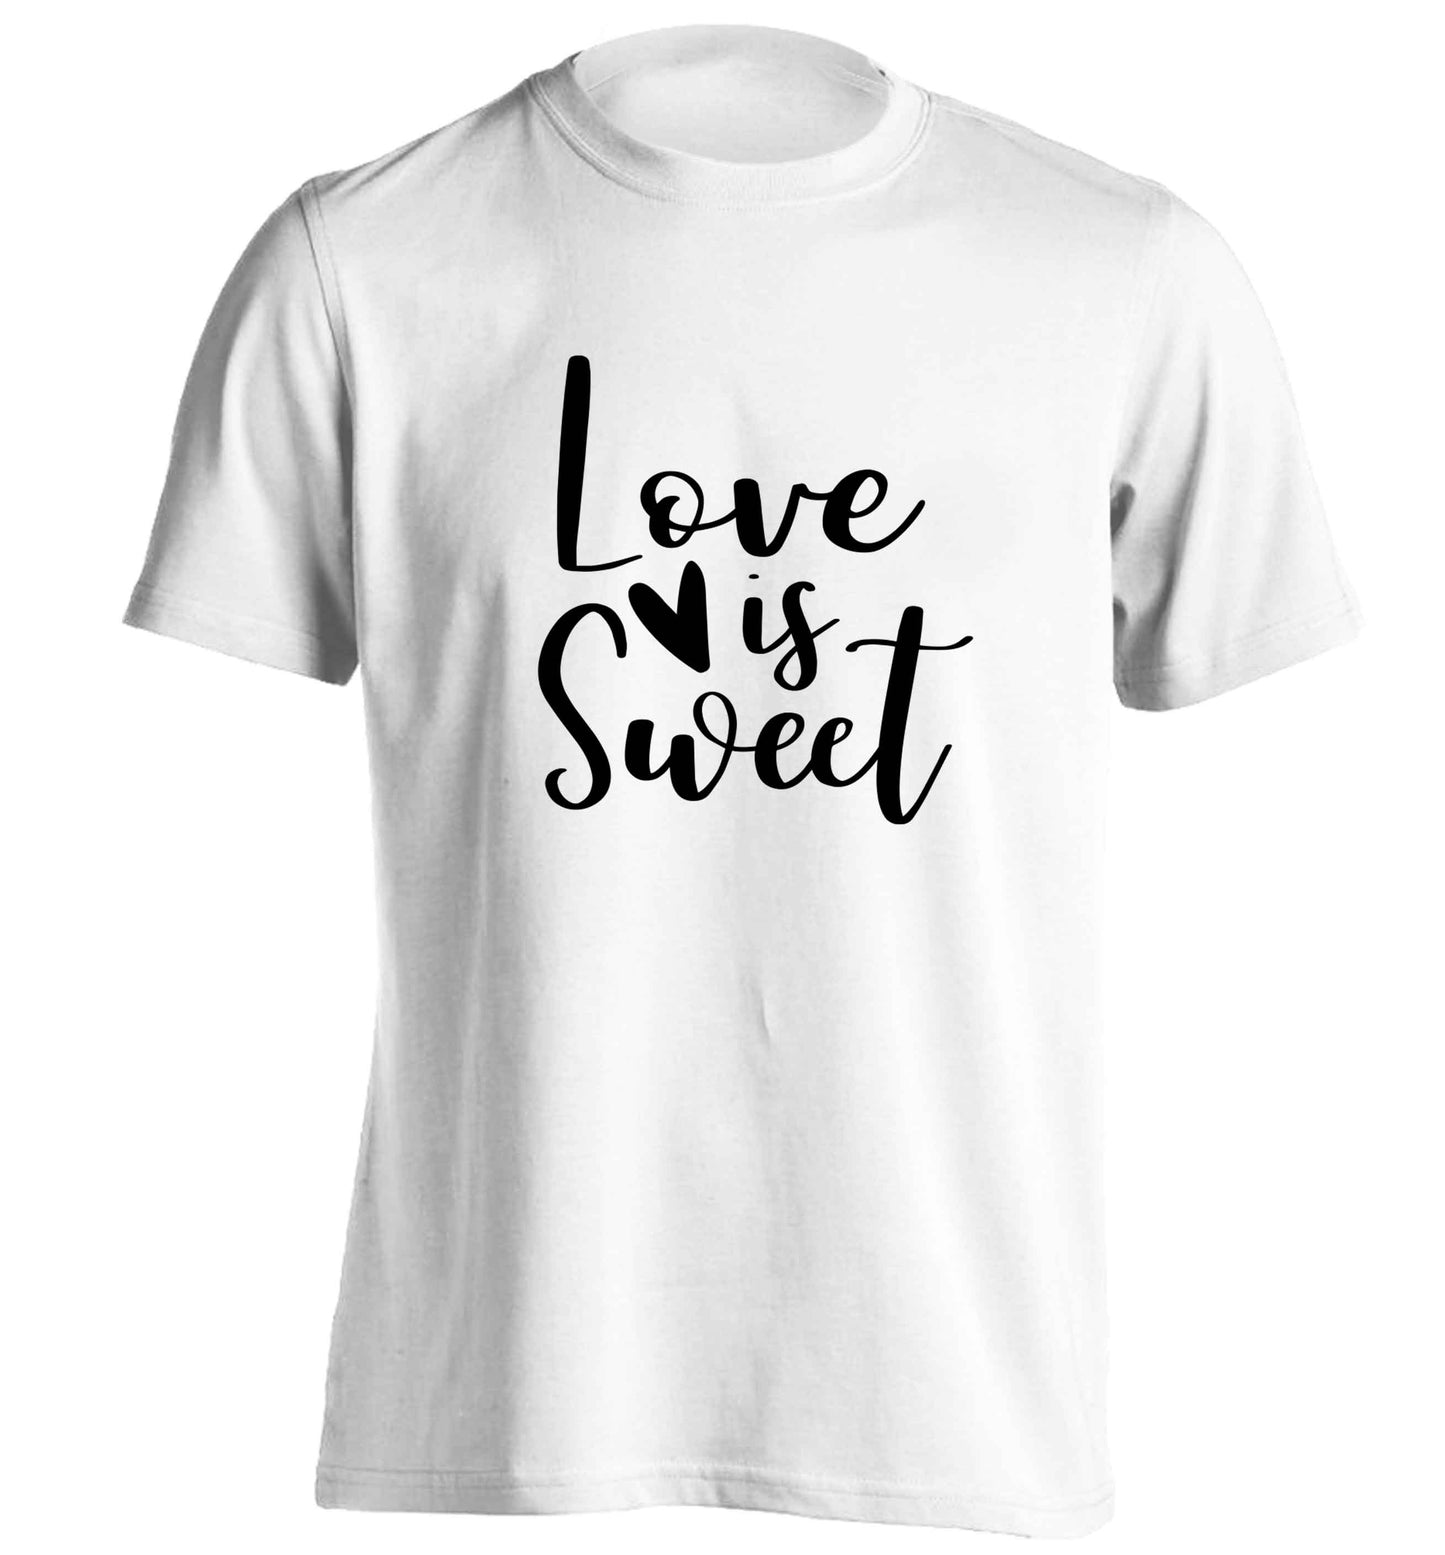 Love really does make the world go round! Ideal for weddings, valentines or just simply to show someone you love them!  adults unisex white Tshirt 2XL